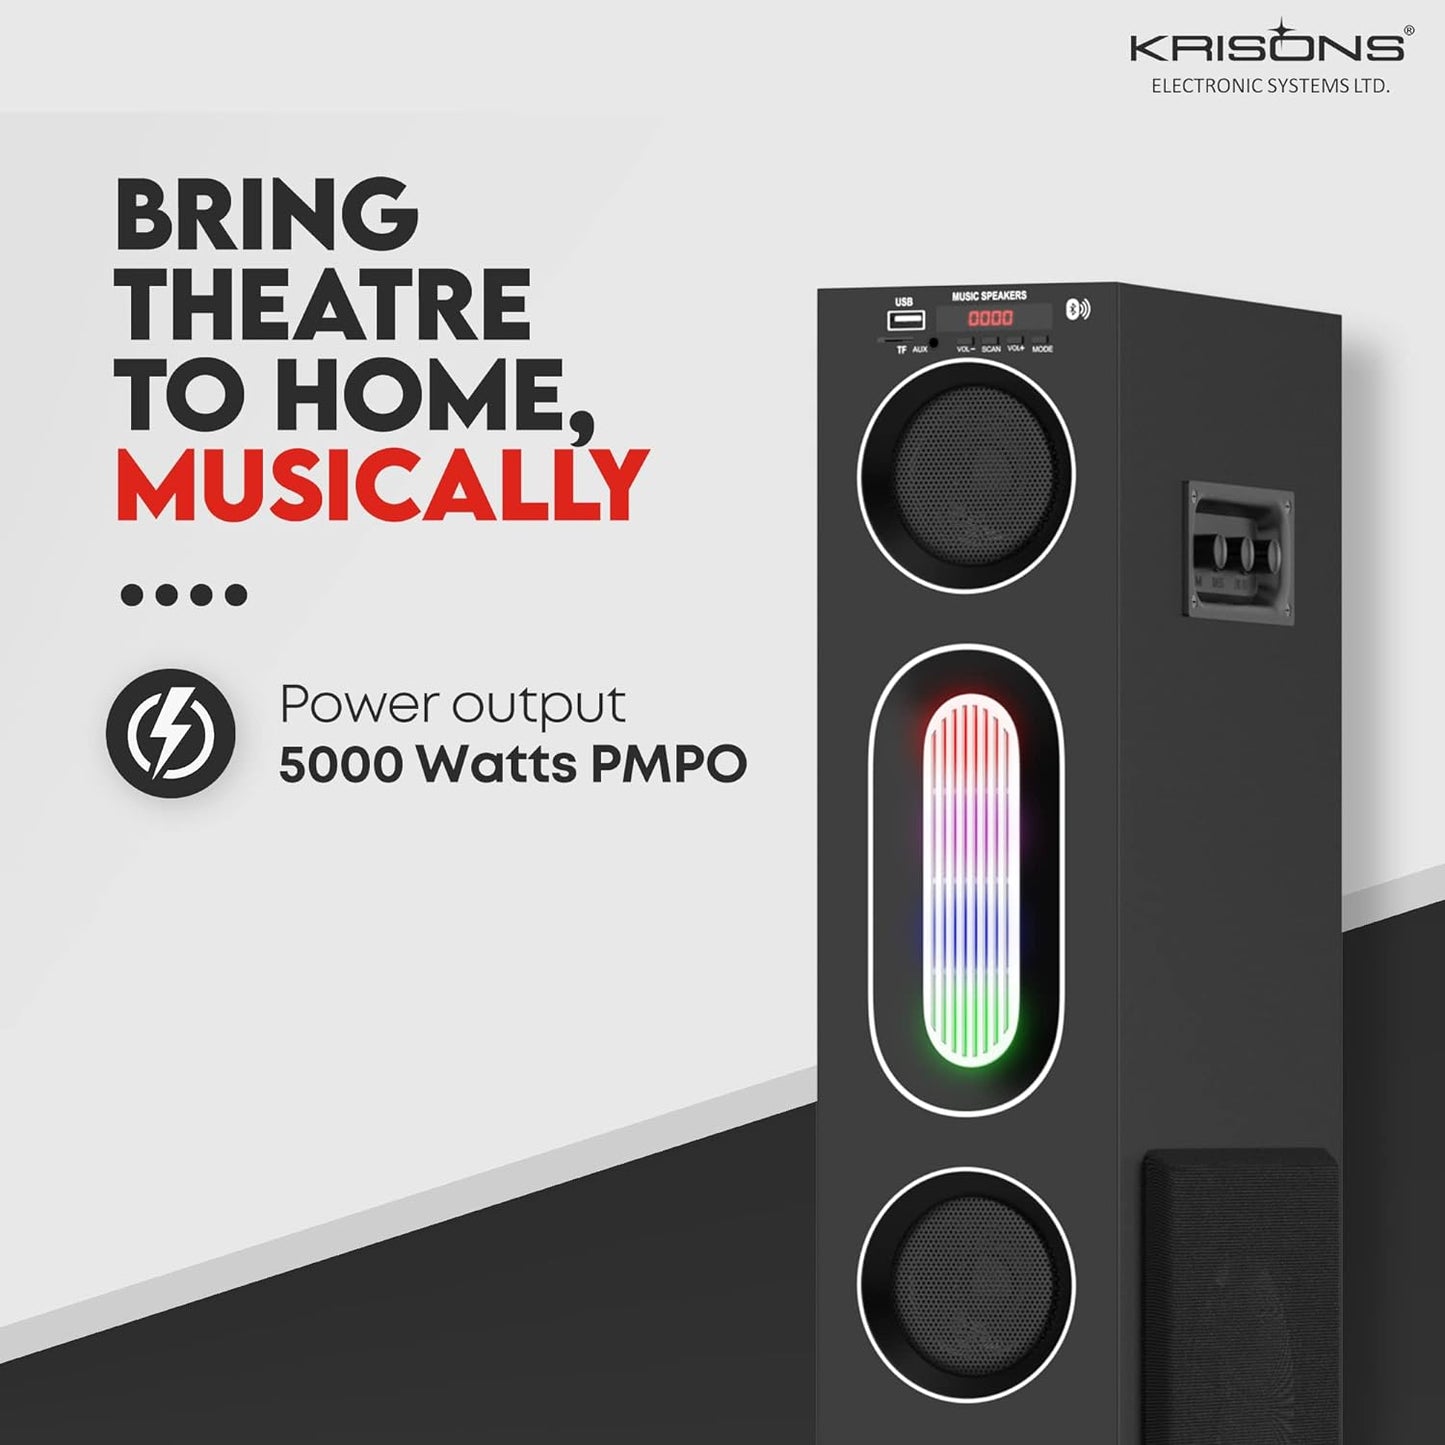 Krisons Cloudbuster Tallboy Tower Speaker, Multimedia Home Theatre, Floor Standing Speaker, RGB Lights, with Bluetooth, FM, USB, AUX Connectivity